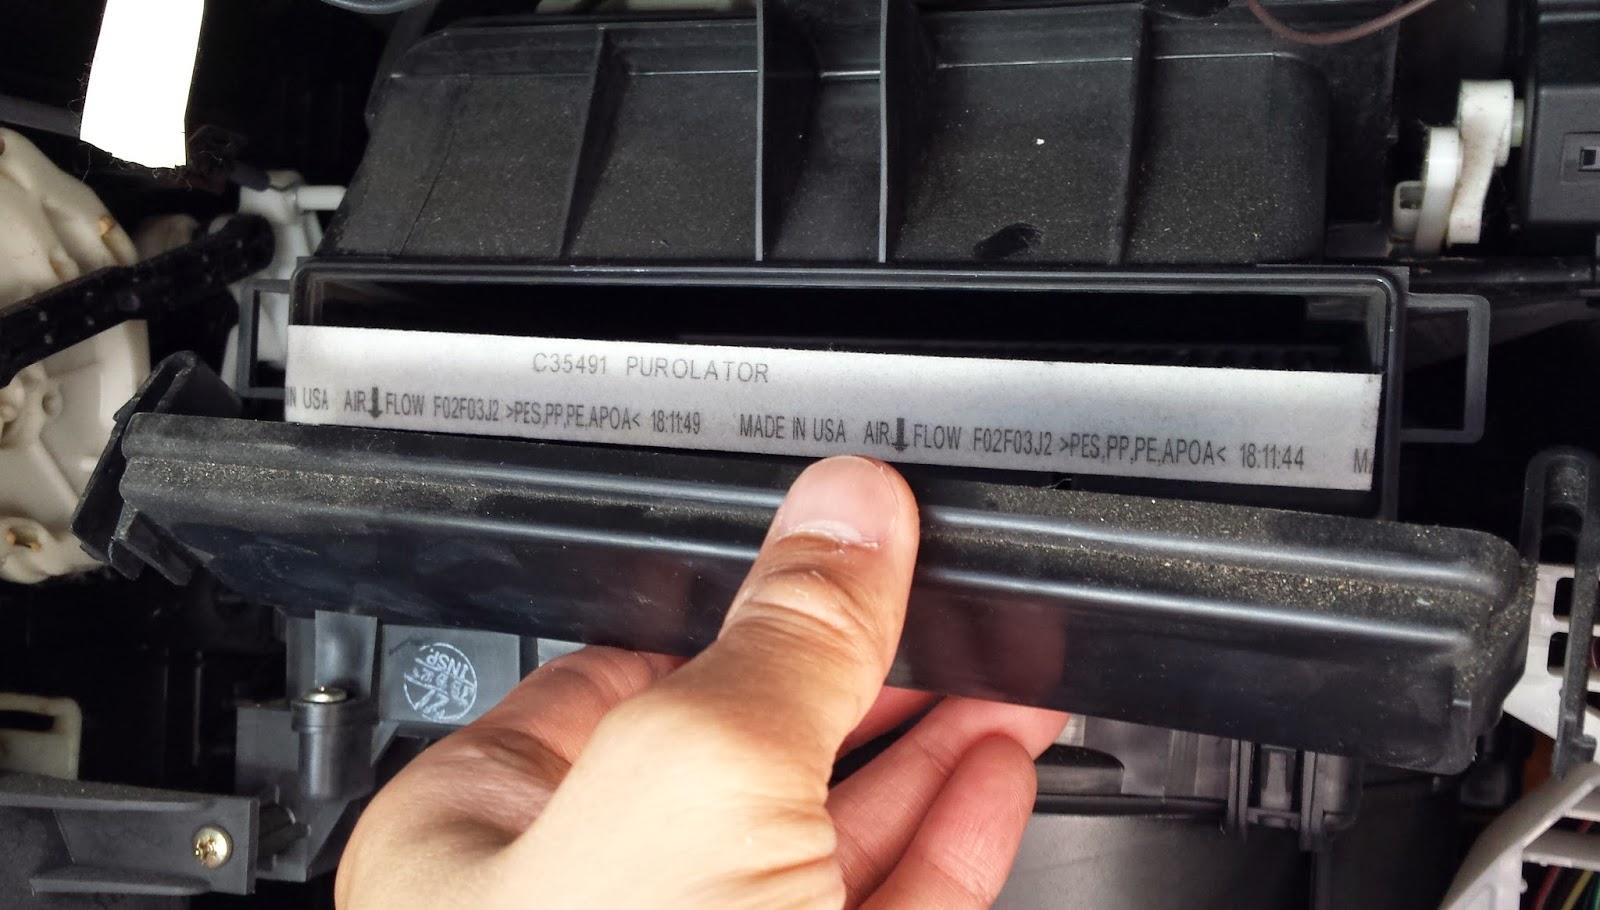 Change In-cabin air filter - 2003 Corolla - Toyota Nation Forum